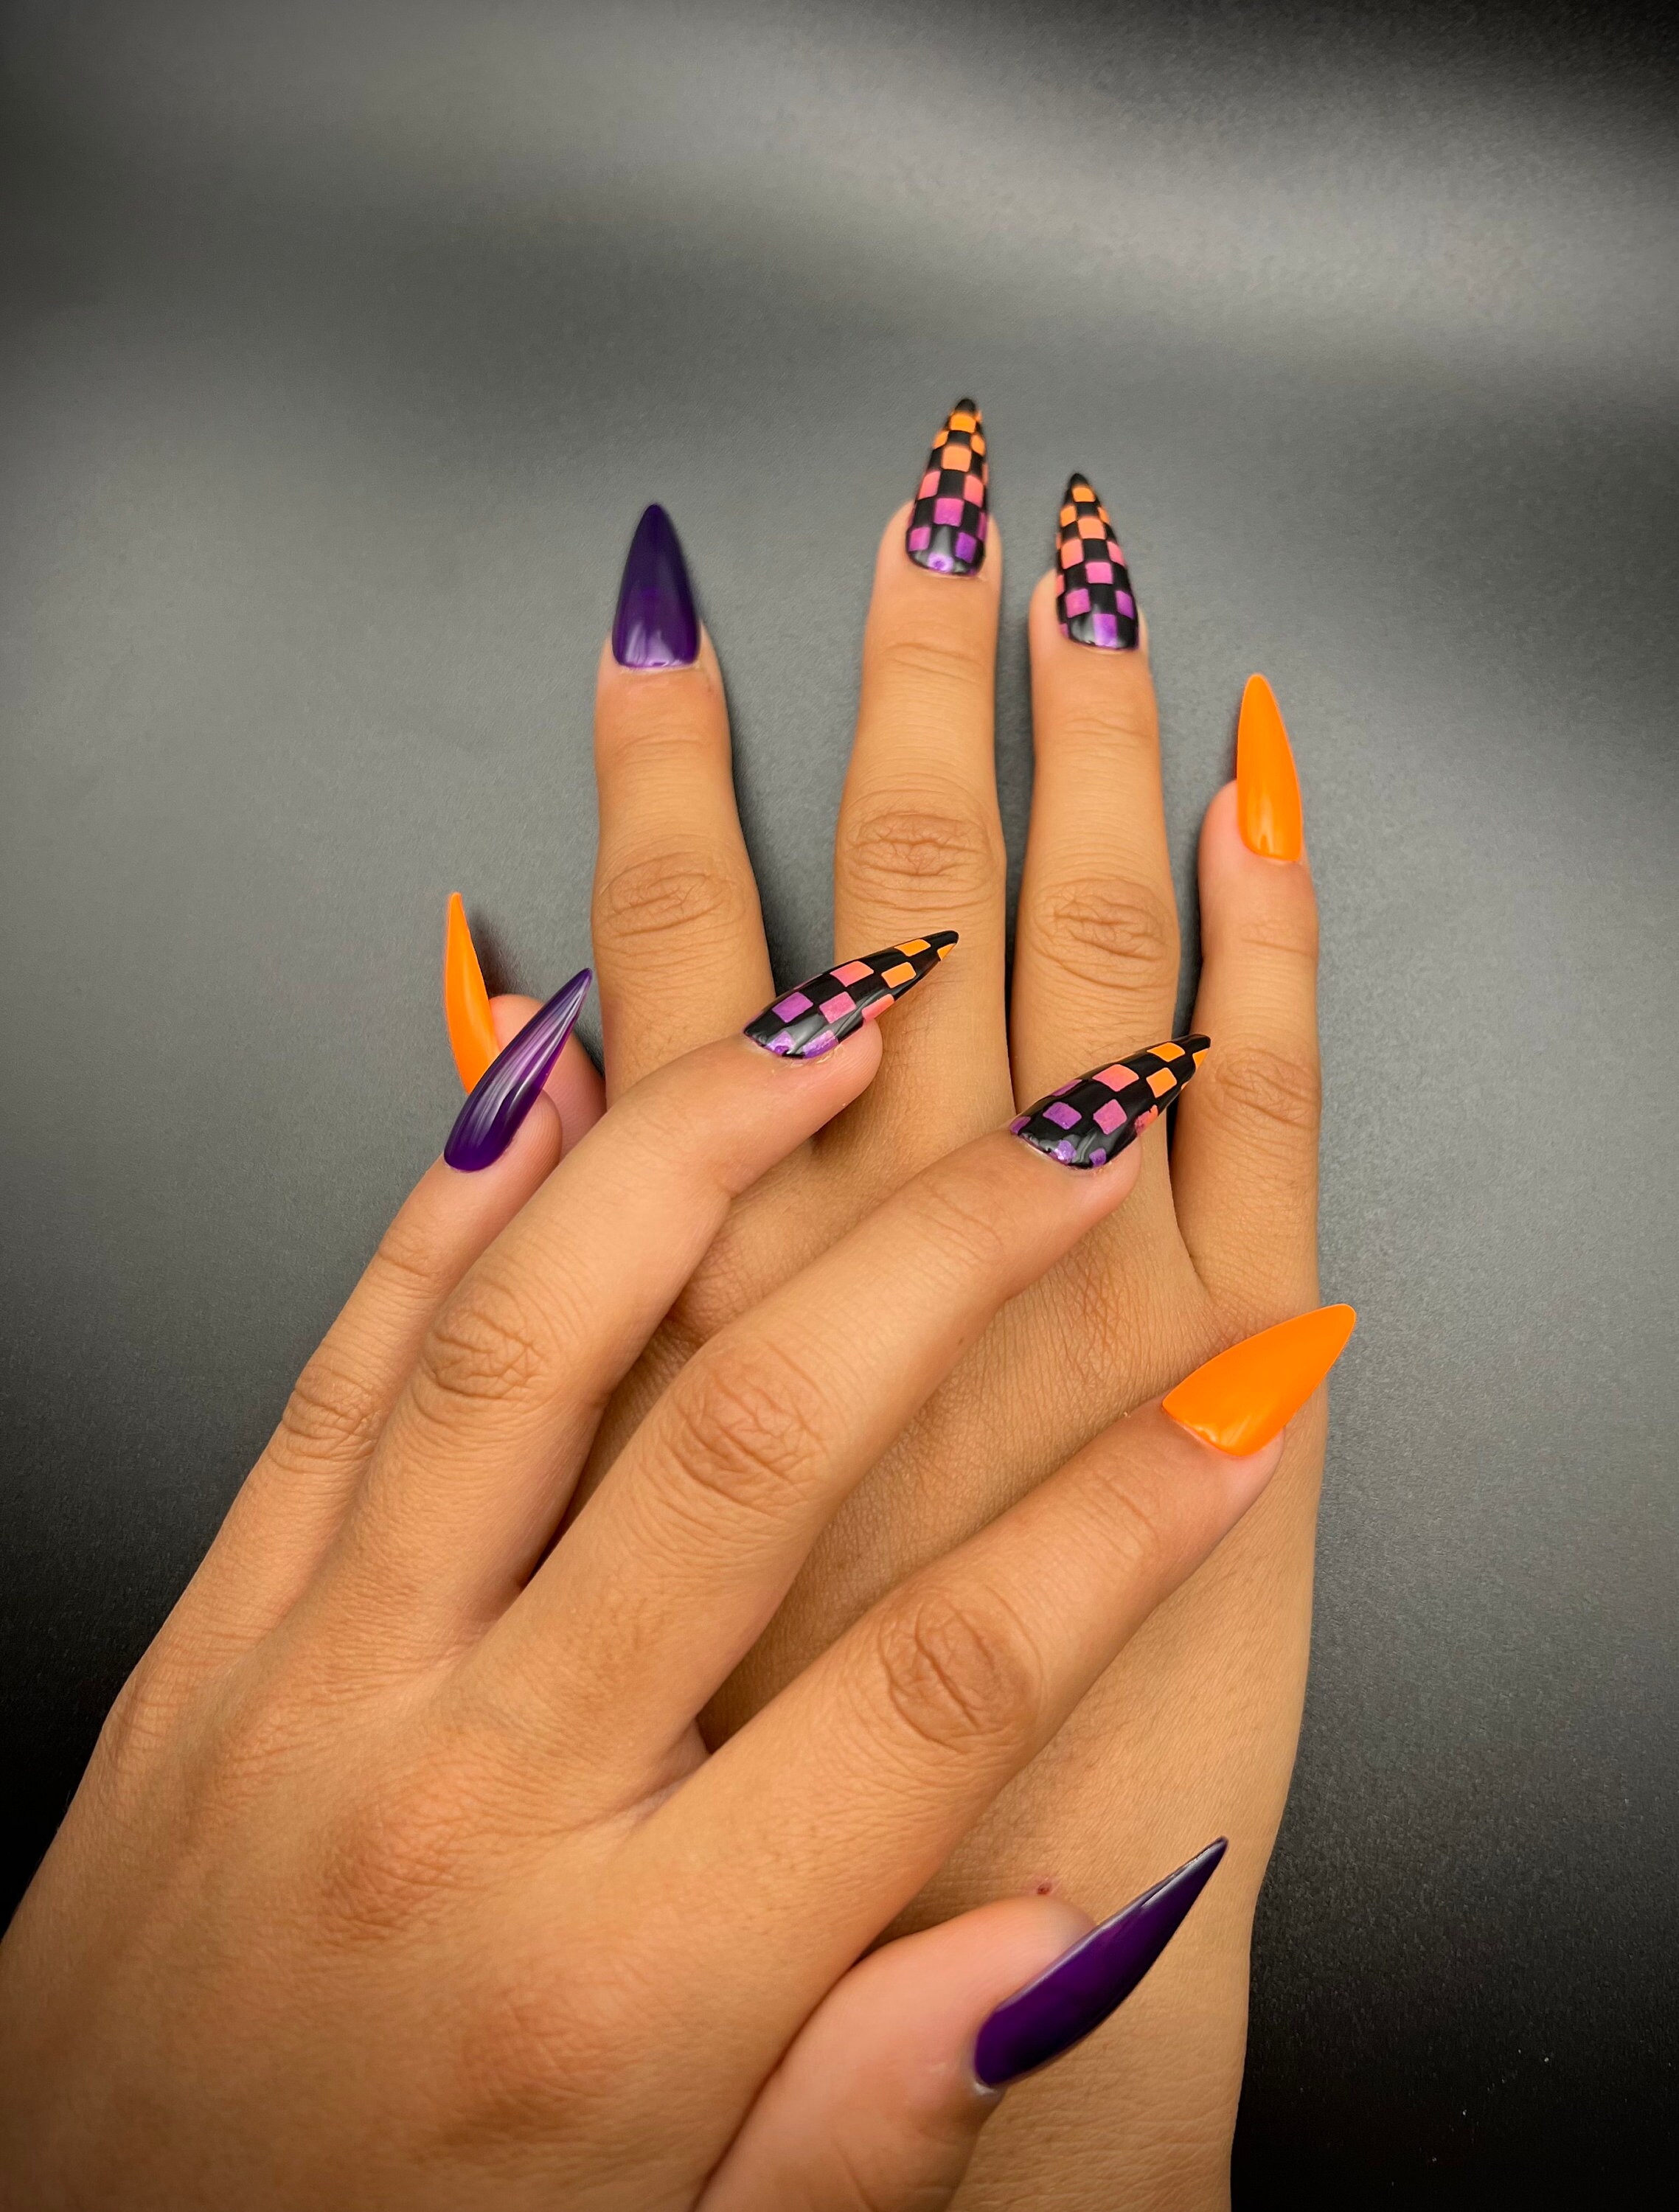 50 Halloween Nail Designs: Spooky Halloween Nail Ideas to Try